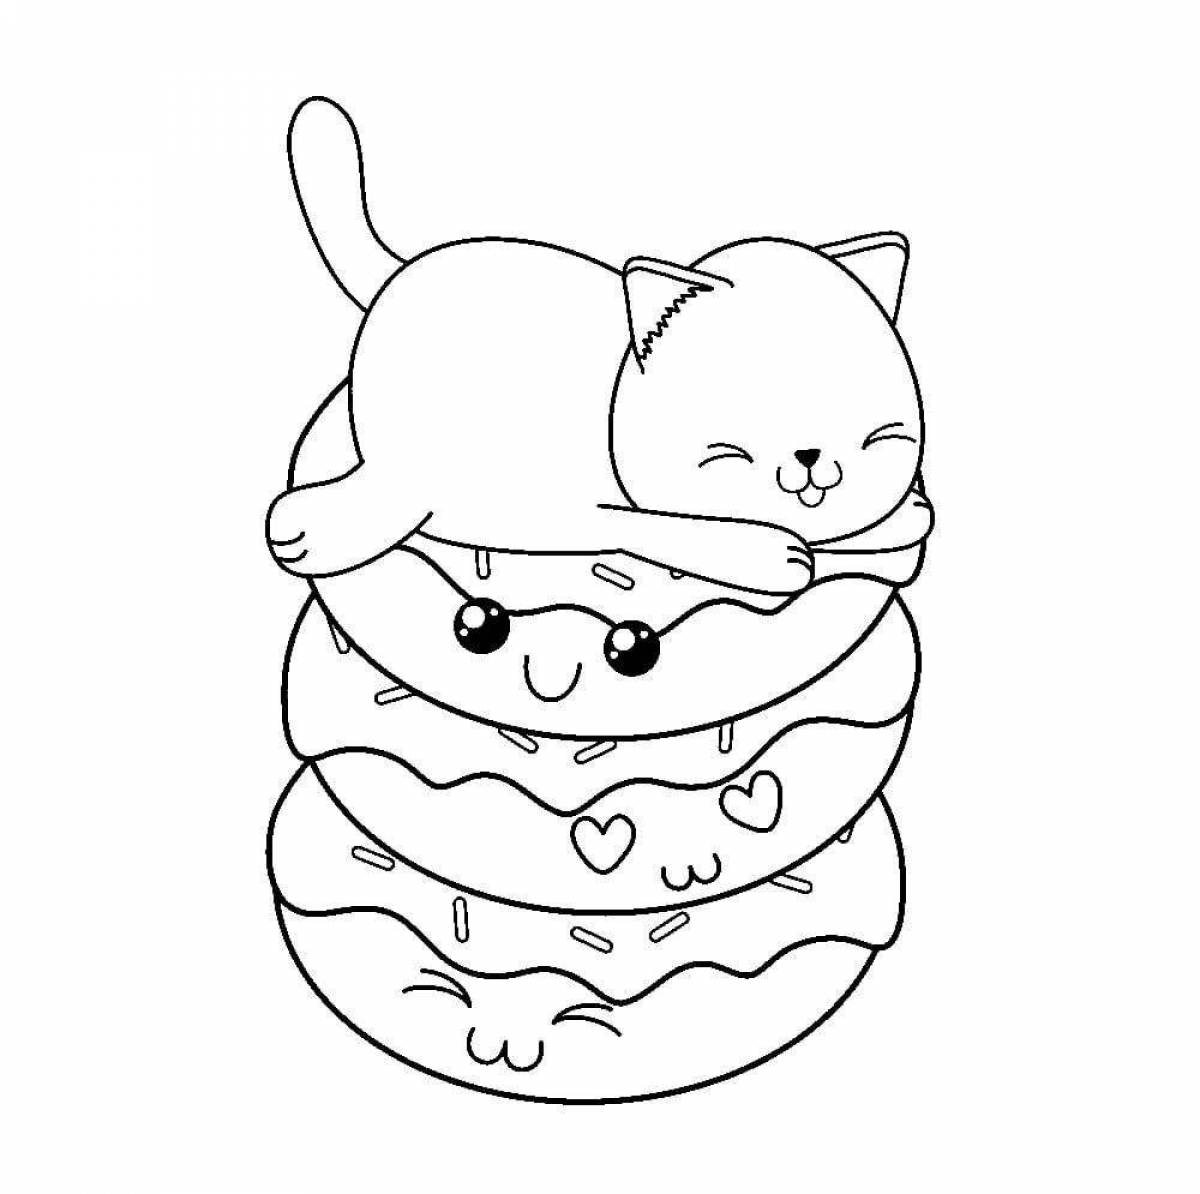 Fluffy Christmas cat coloring page